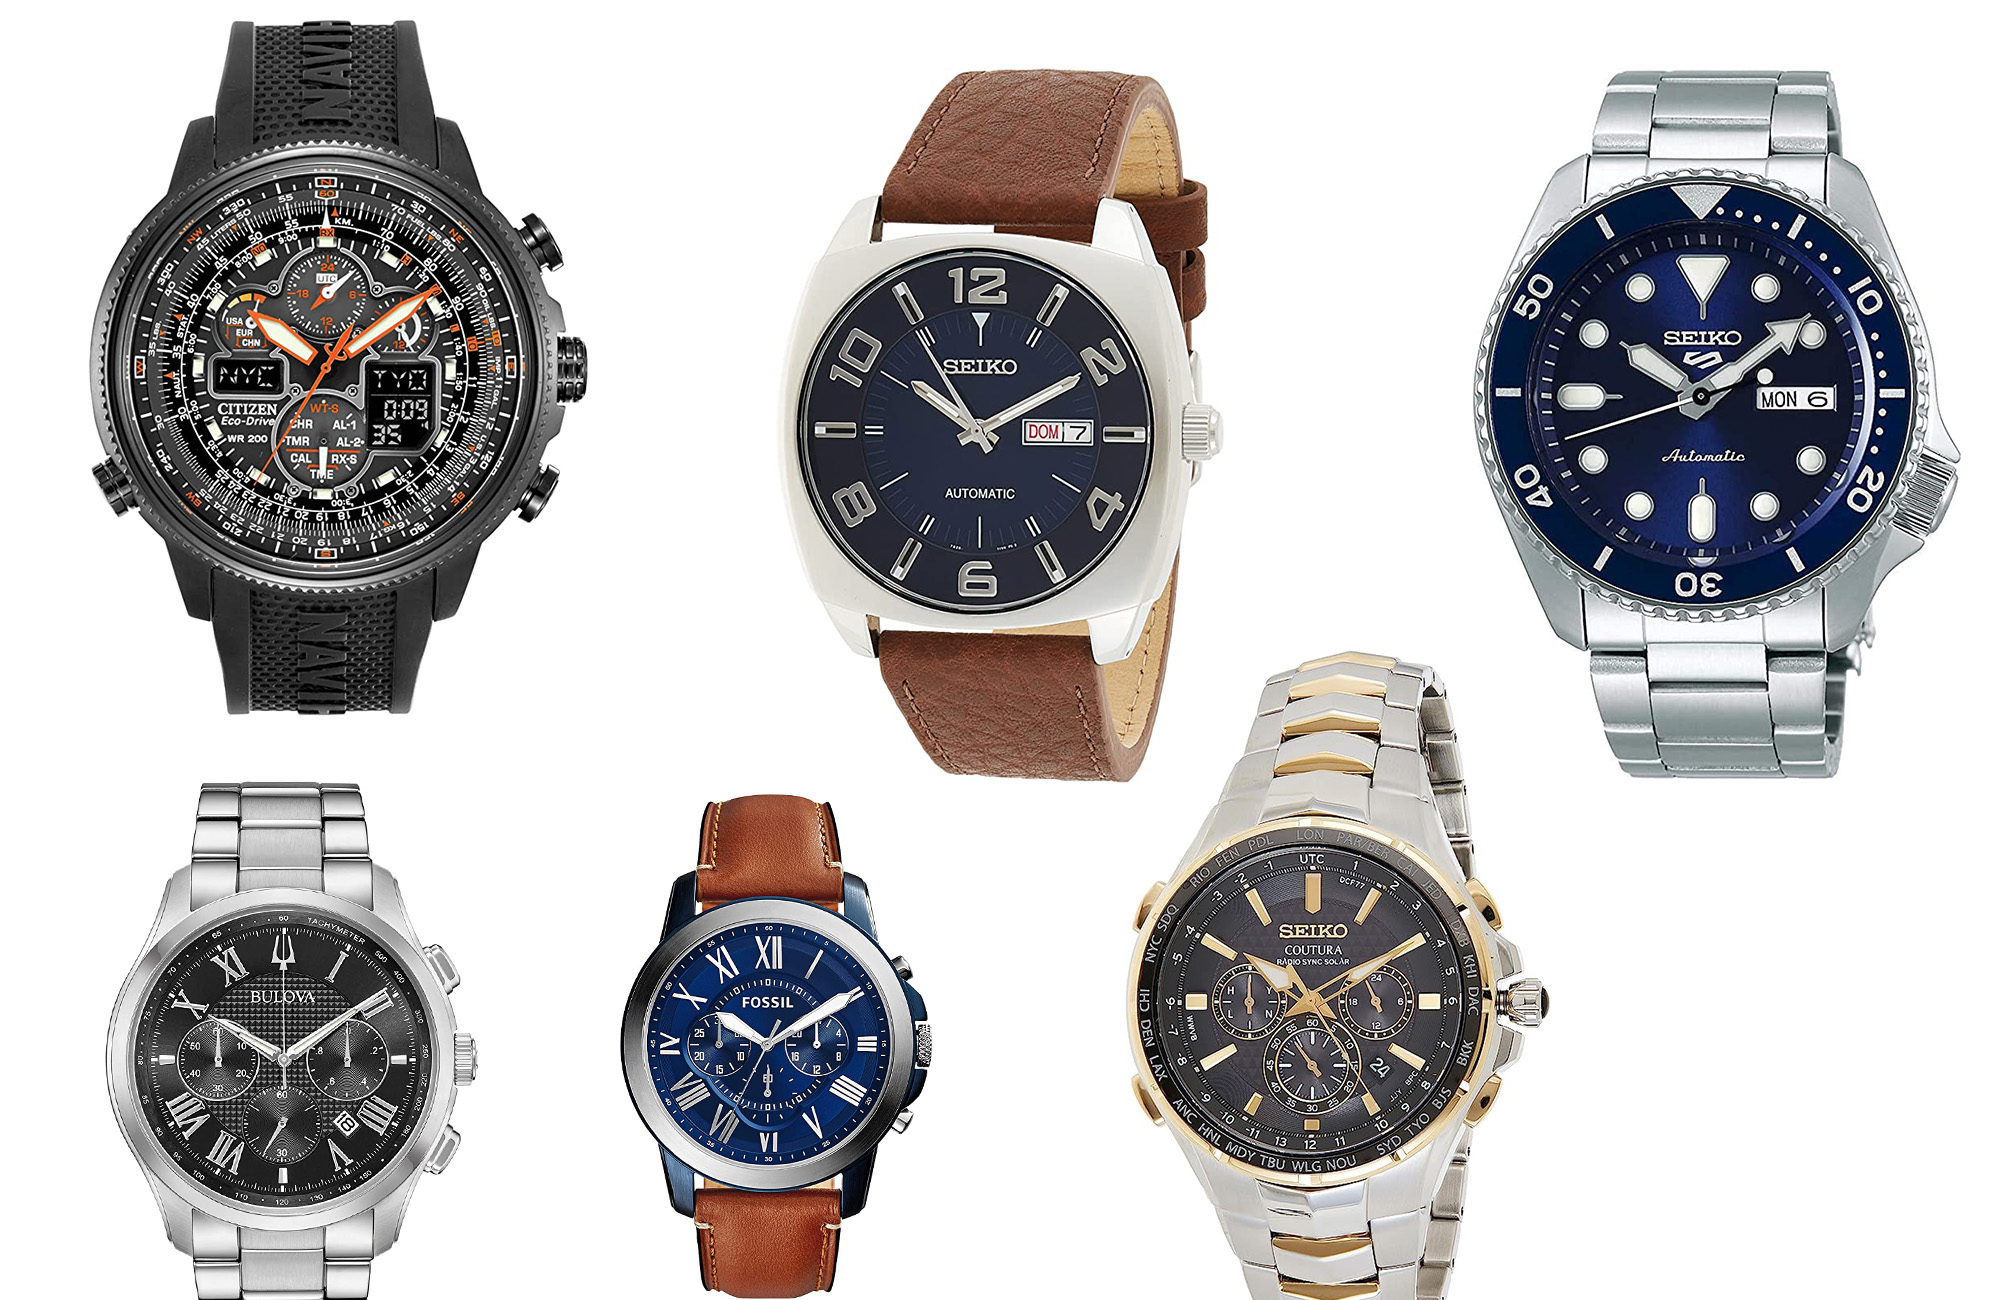 slijtage helaas deed het Don't miss these last-minute deals on the best men's watches from Seiko,  Bulova, Fossil, and Citizen this Prime Day | Popular Science